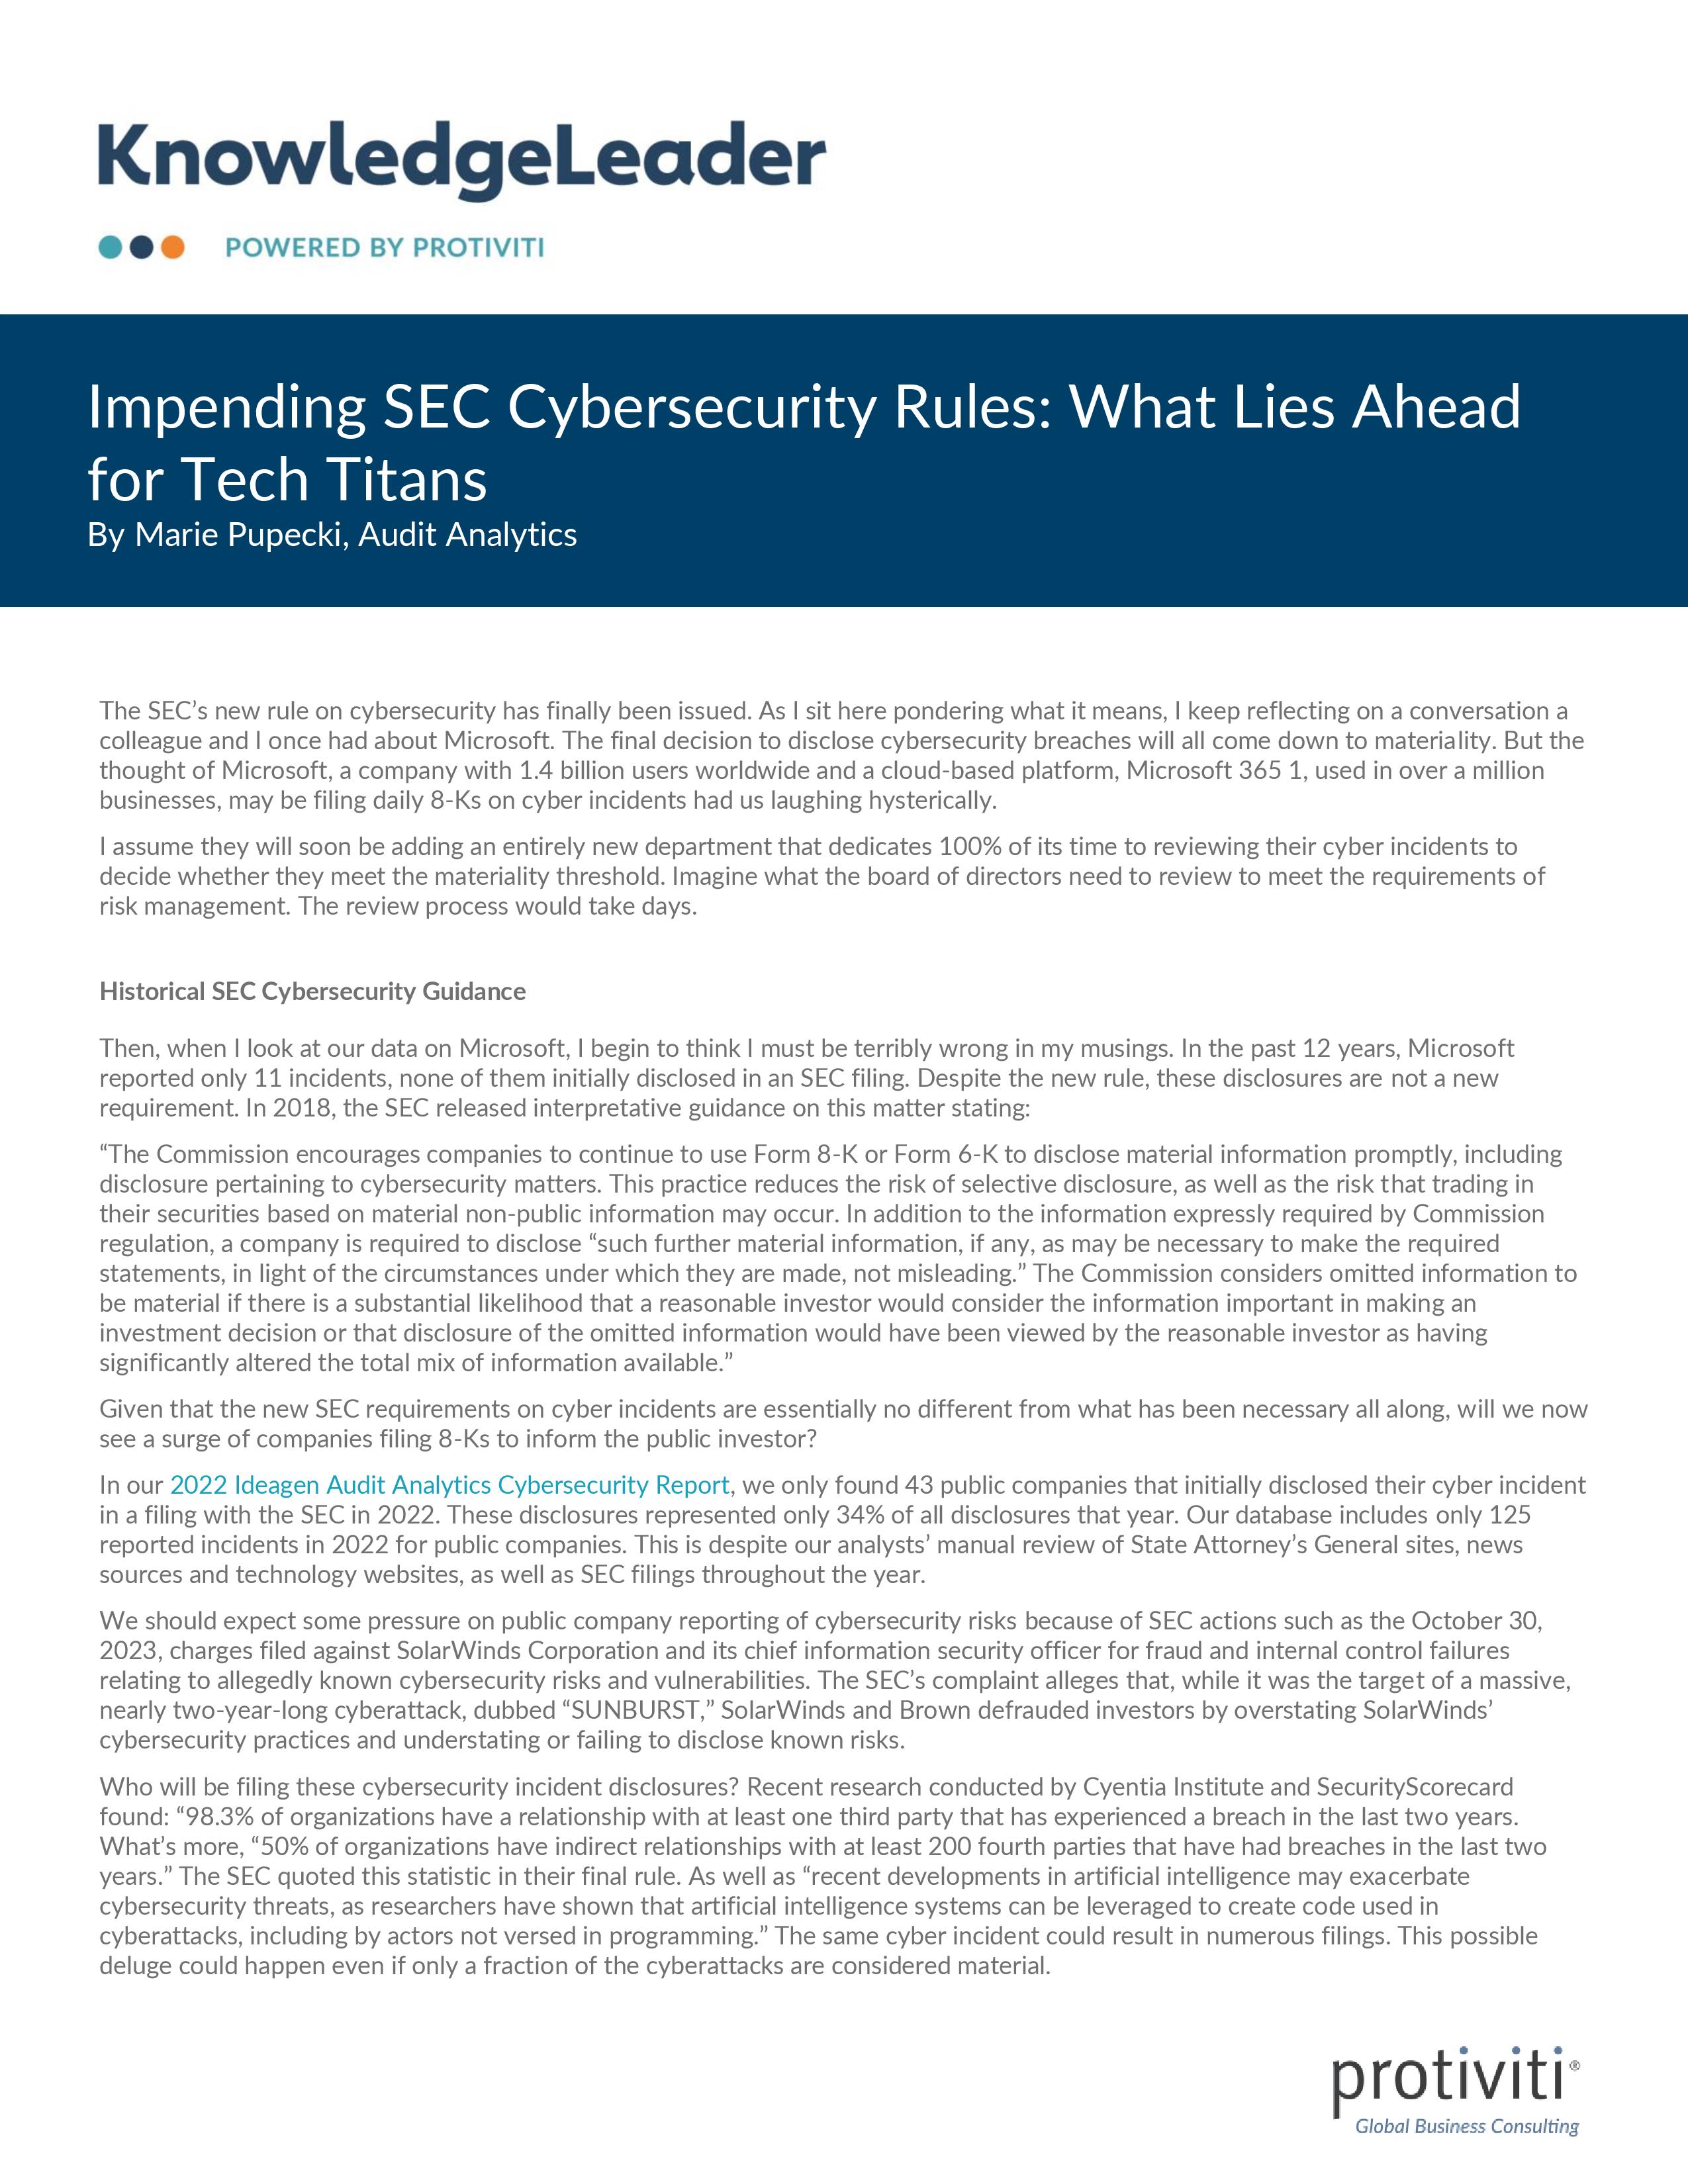 Screenshot of the first page of Impending SEC Cybersecurity Rules What Lies Ahead for Tech Titans